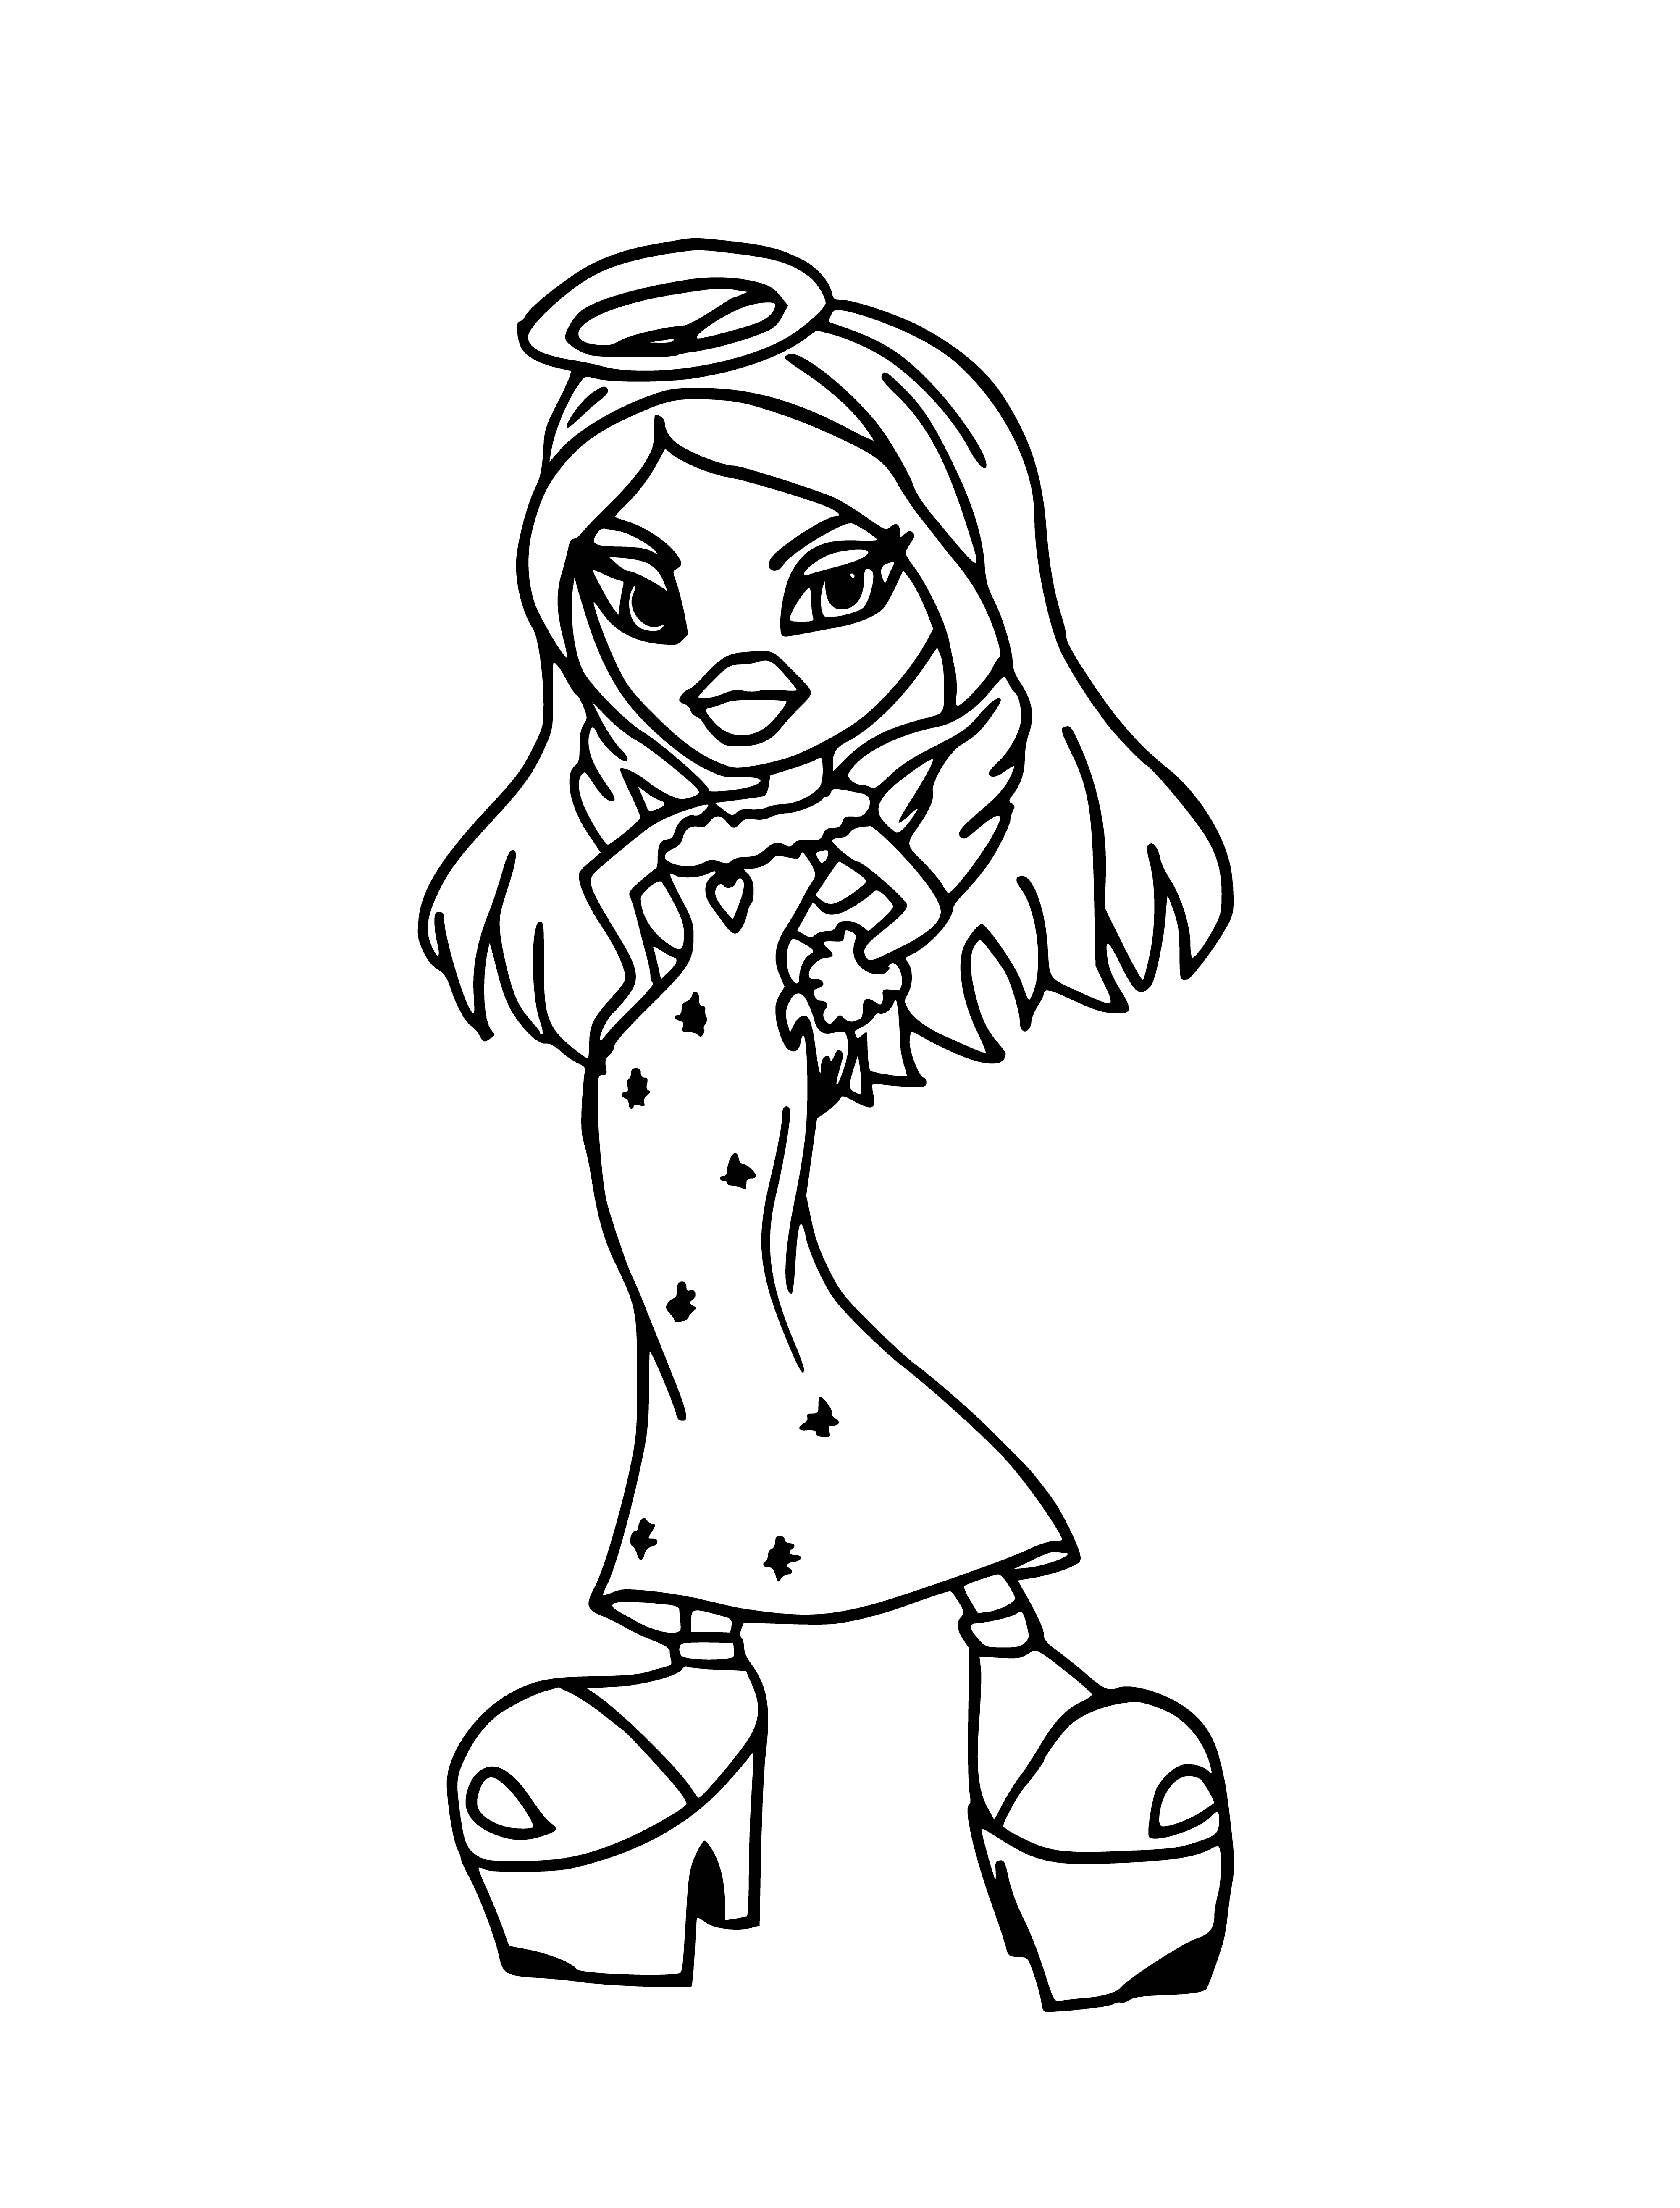 coloring page: Light brown skinned girl w/ long brown/pink/purple hair in high ponytail. Wearing purple/pink tank, ripped jeans & sneakers.